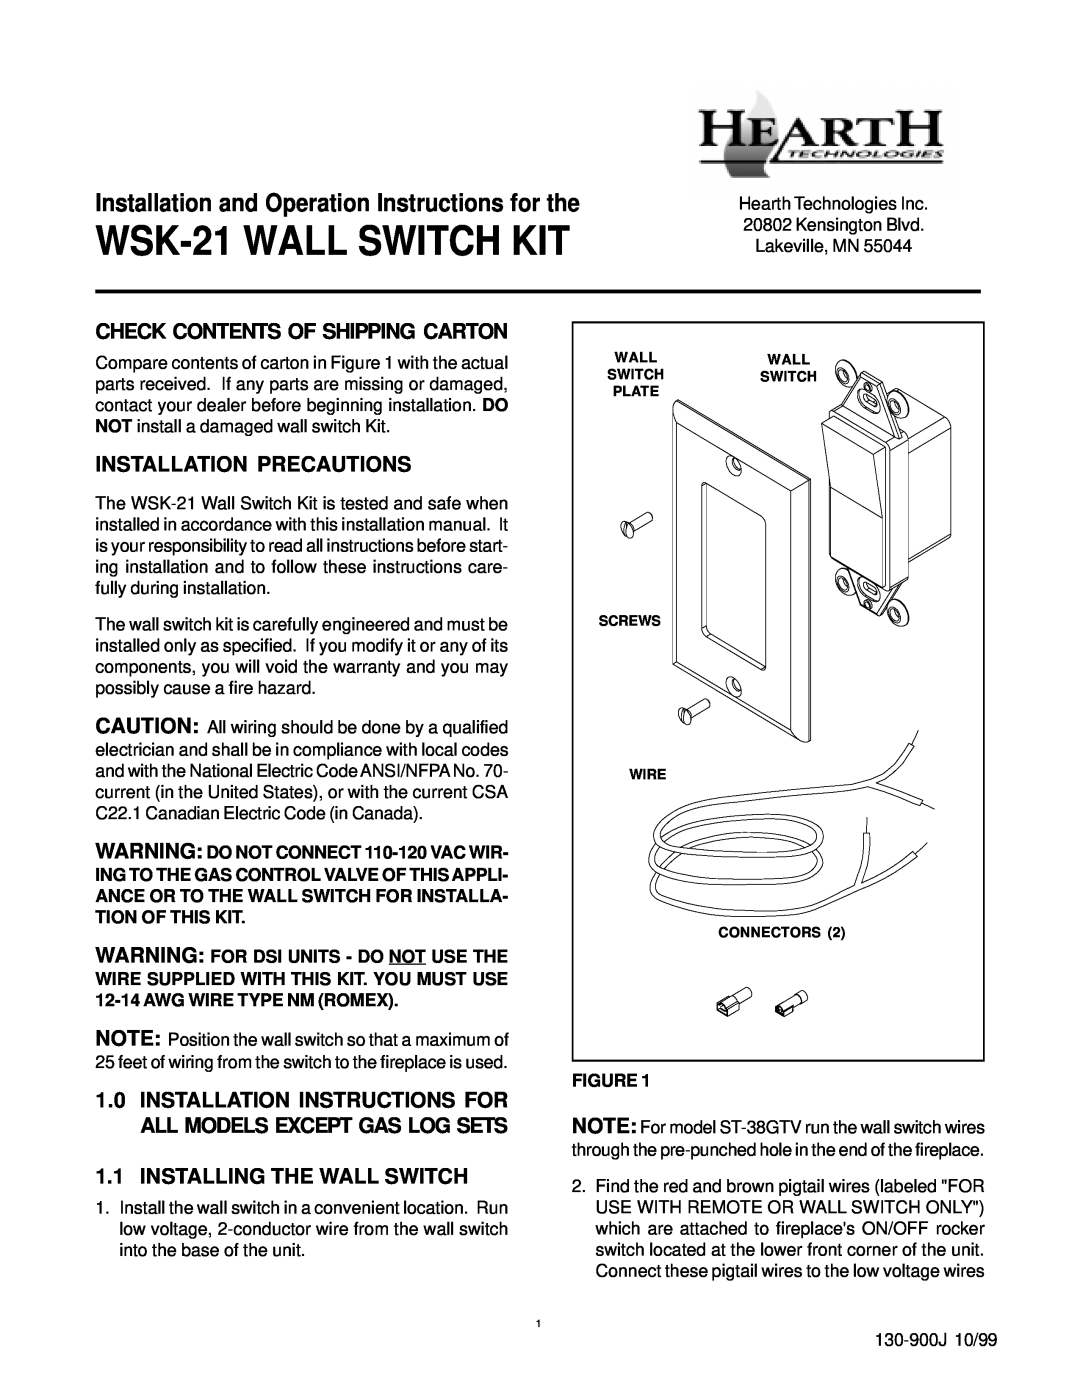 Hearth and Home Technologies WSK-21 installation instructions Check Contents Of Shipping Carton, Installation Precautions 